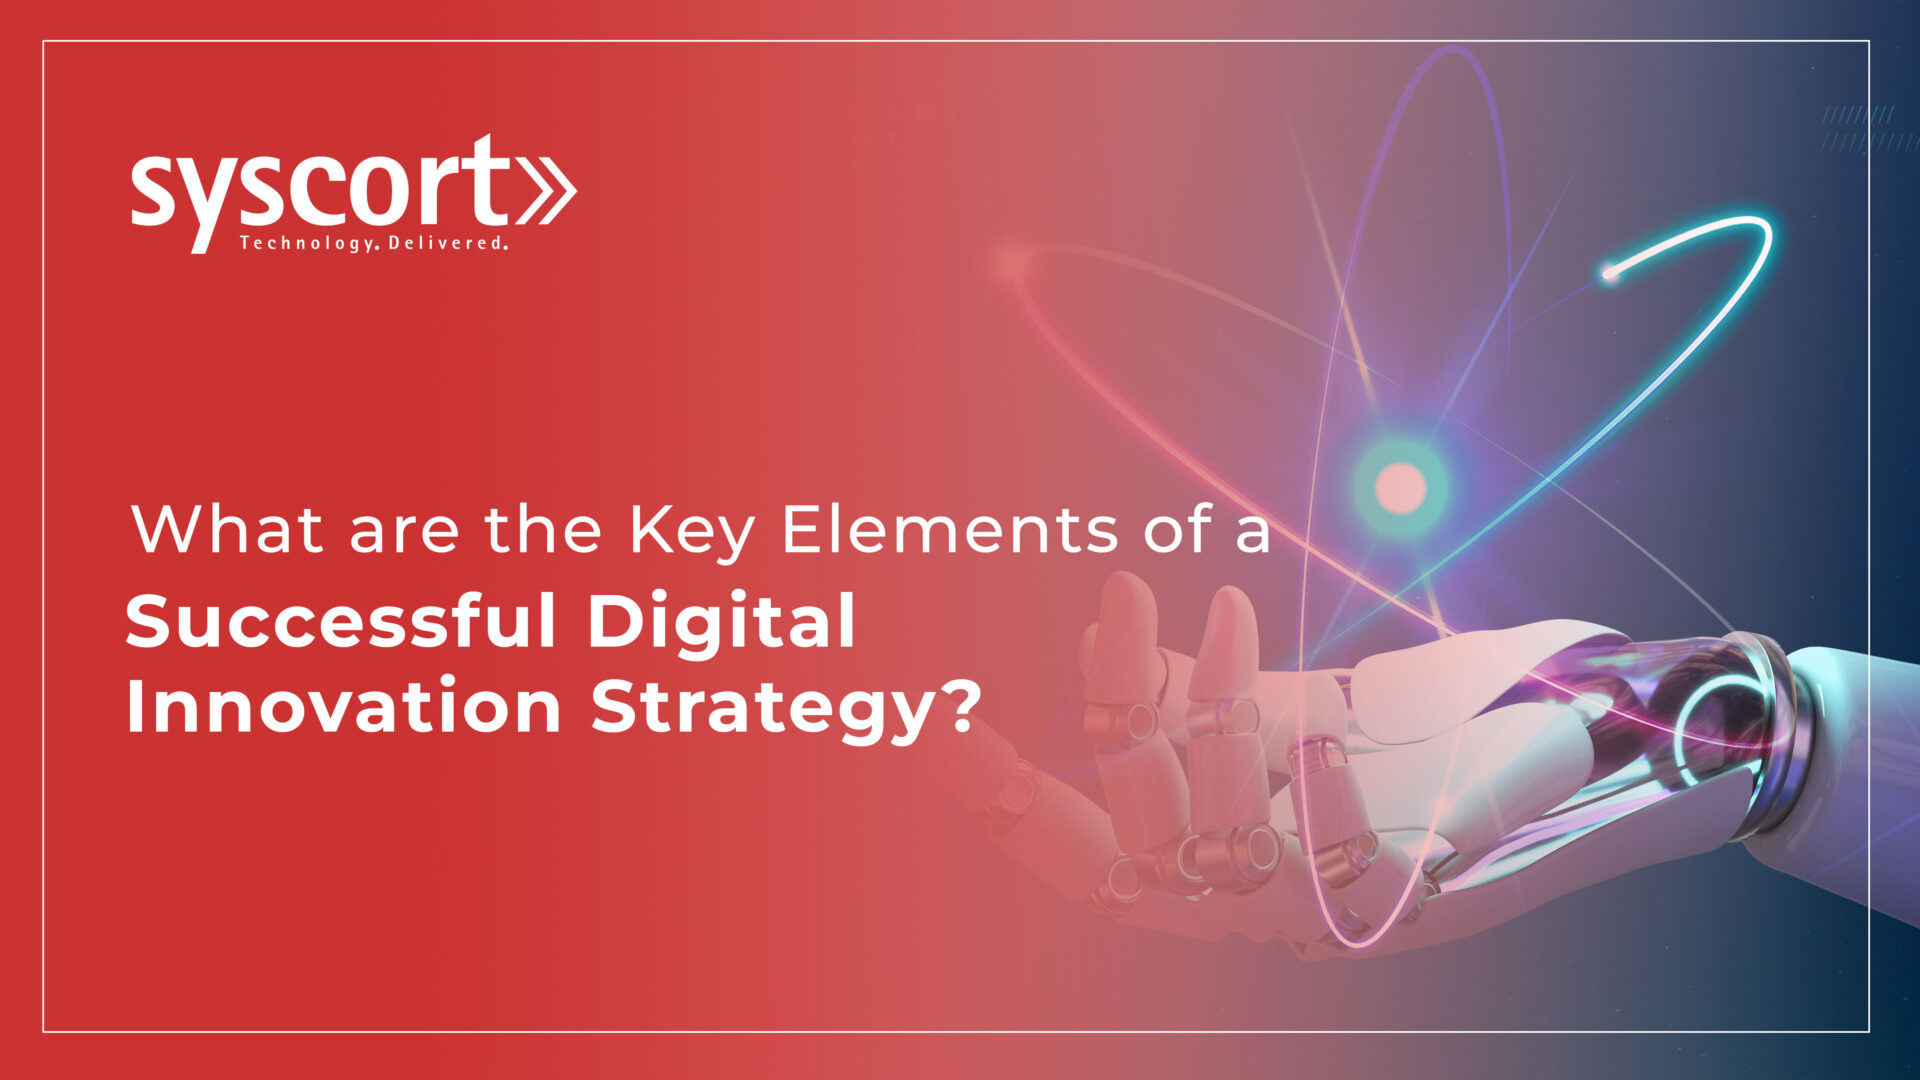 What are the Key Elements of a Successful Digital Innovation Strategy?